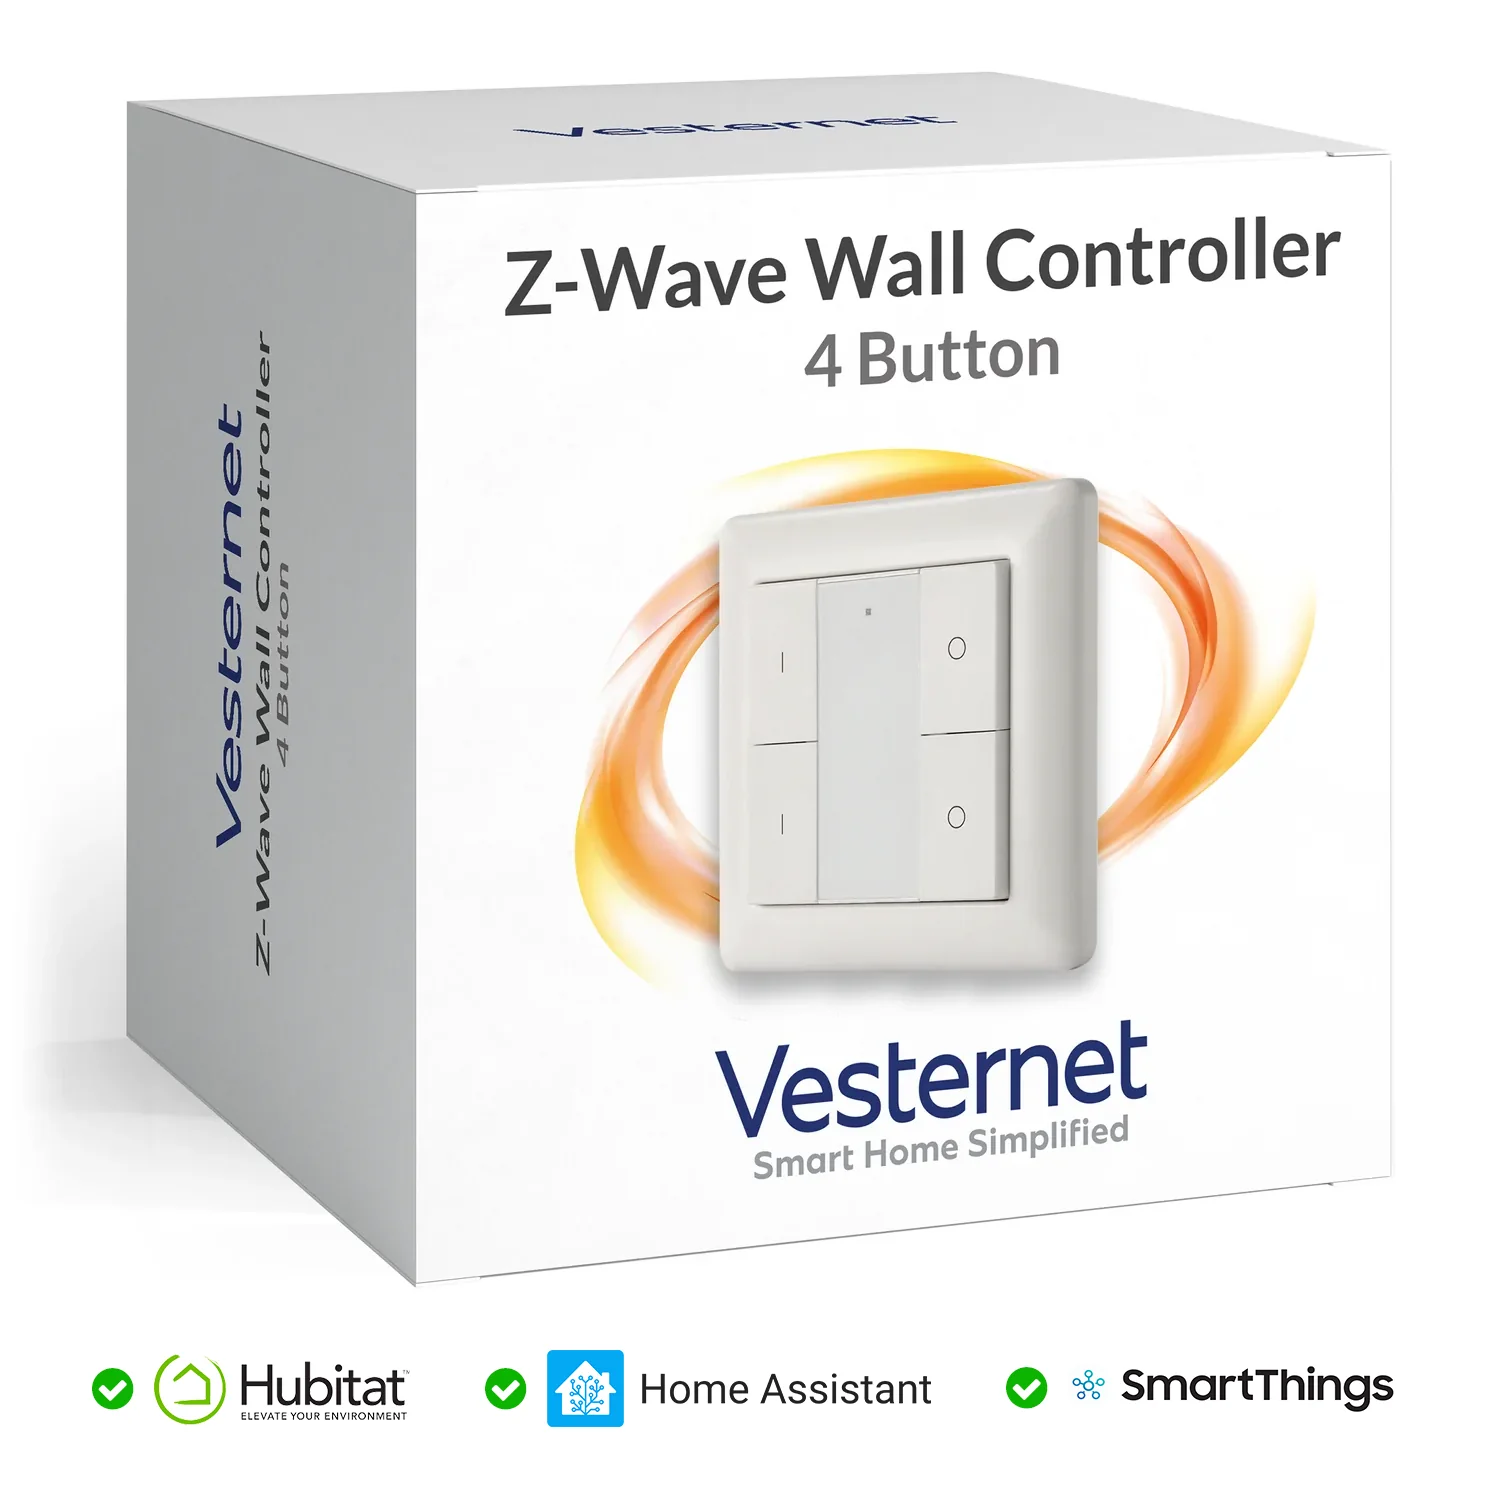 Is this device compatible with my Z-Wave Controller?